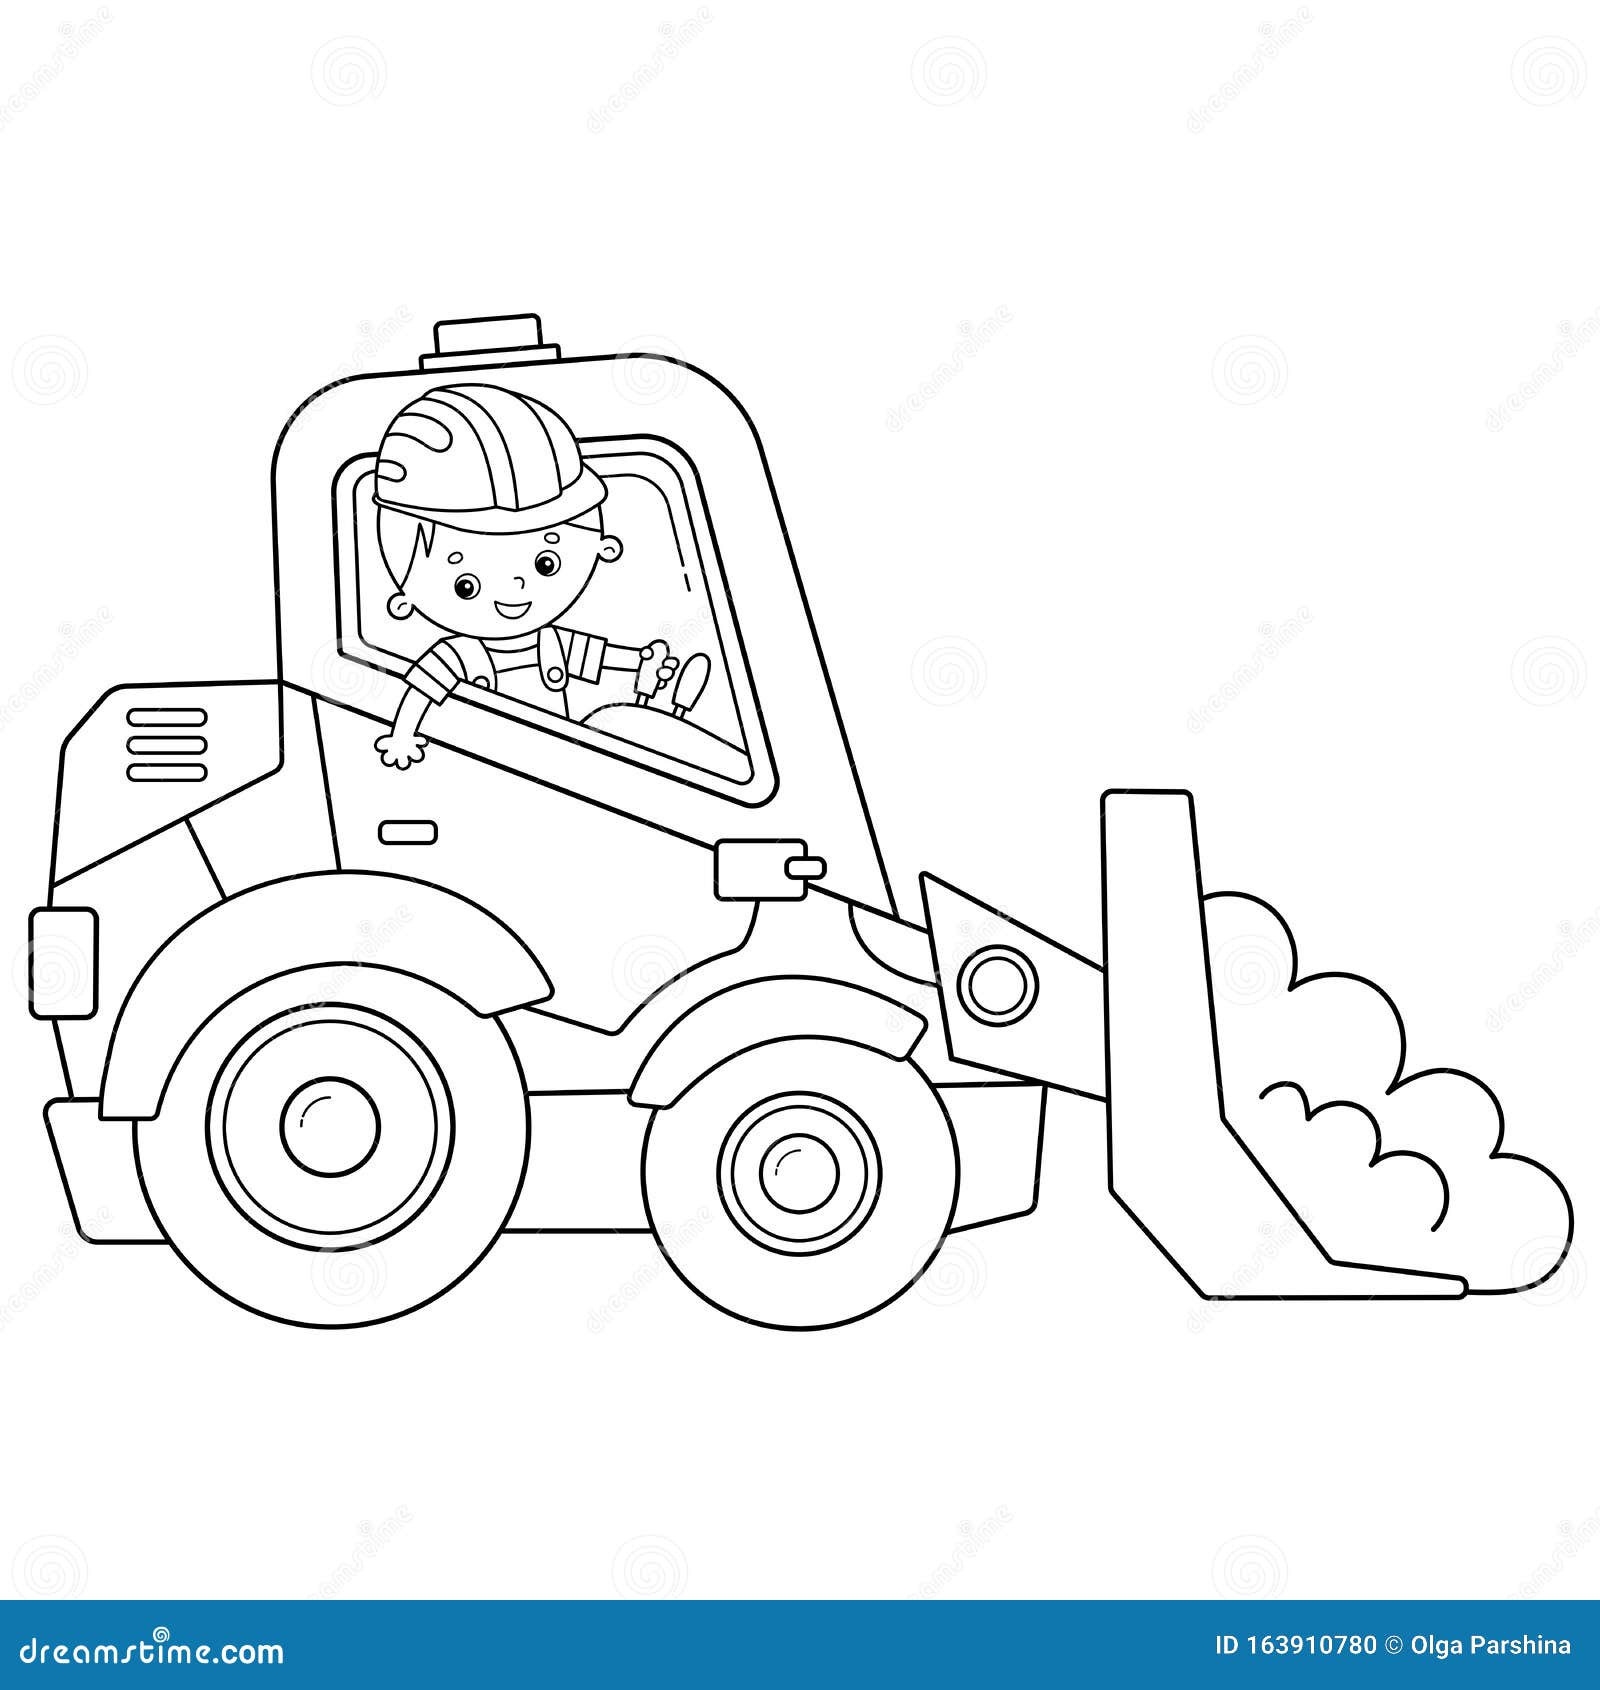 Coloring Page Outline Of Cartoon Bulldozer. Construction Vehicles